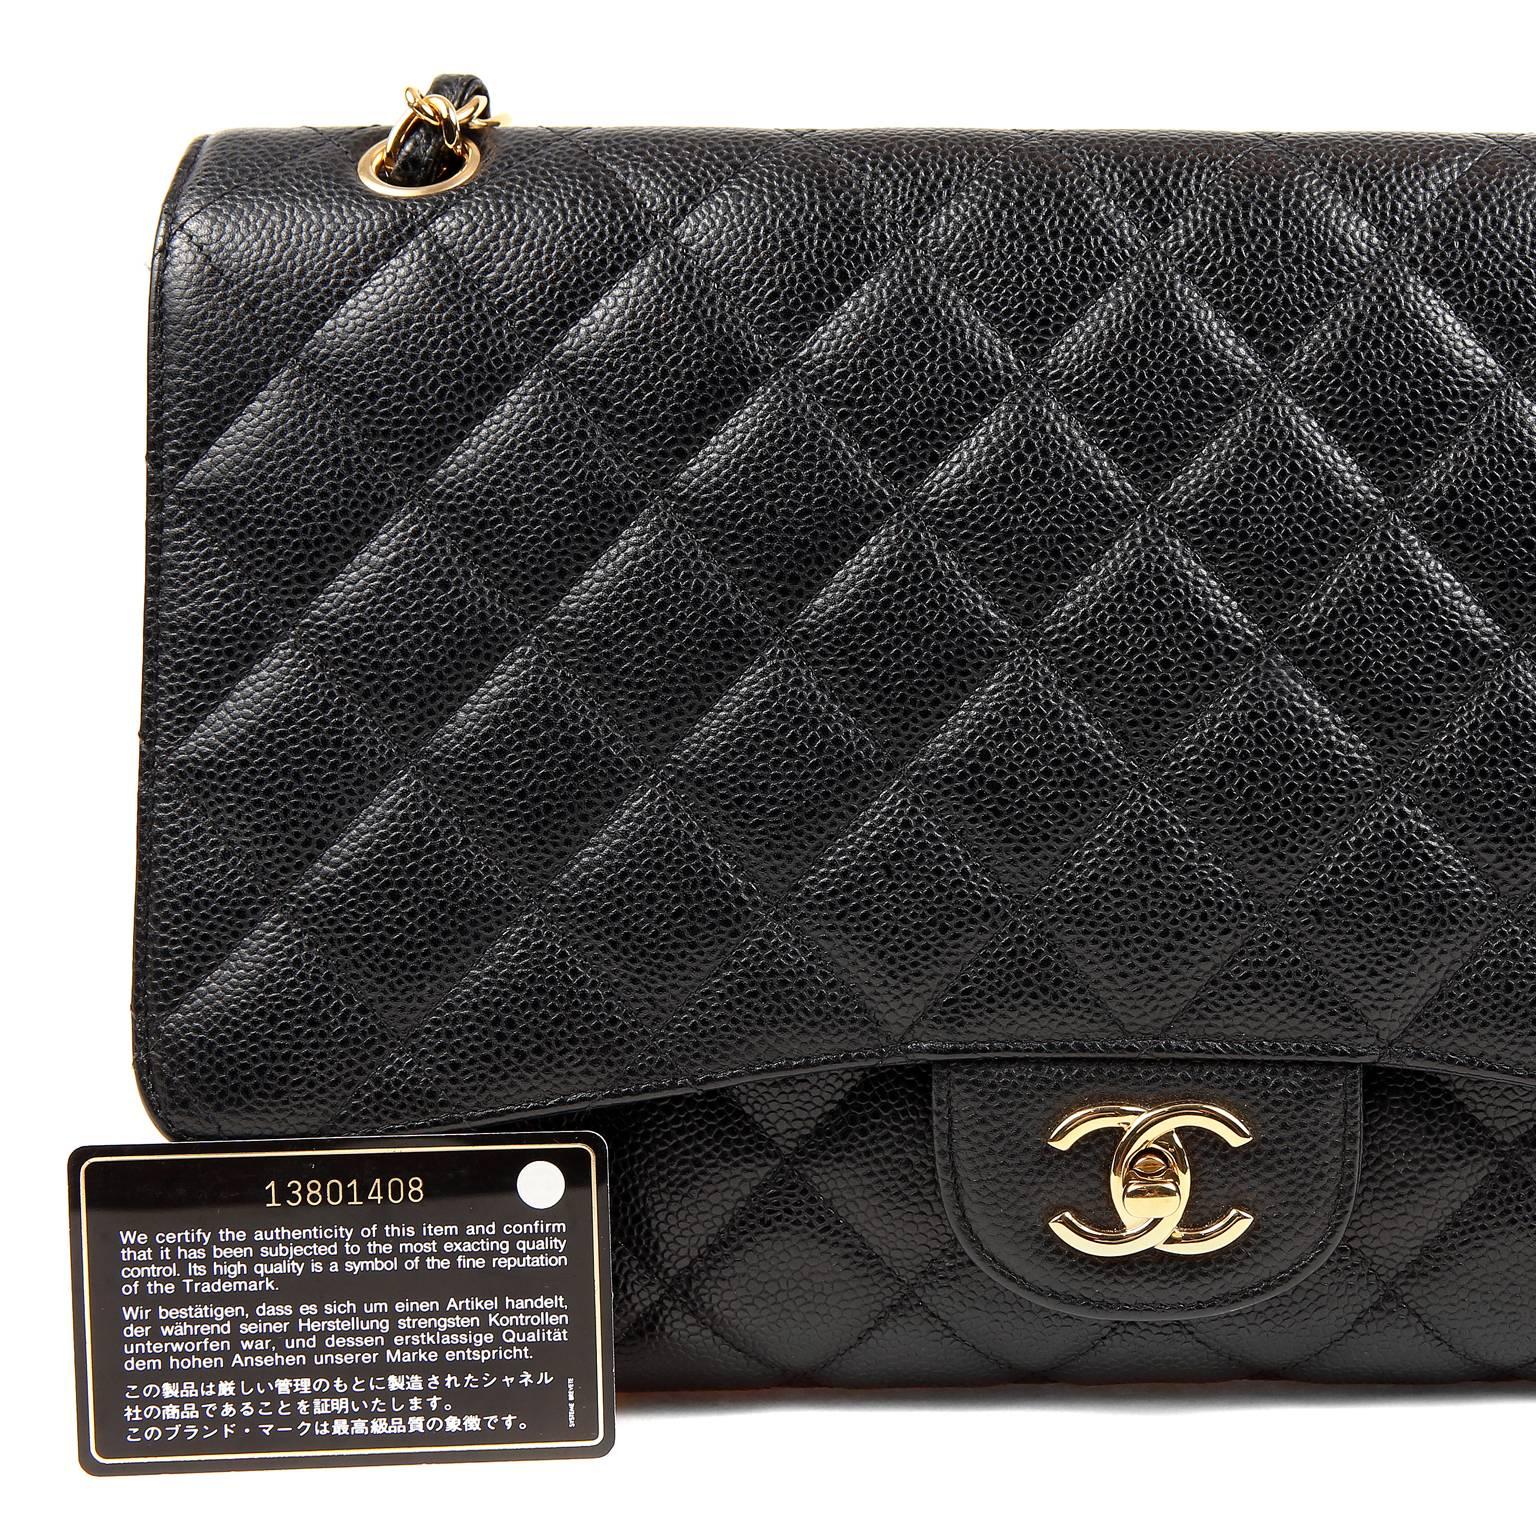 Chanel Black Caviar Maxi Flap with Gold Hardware 6